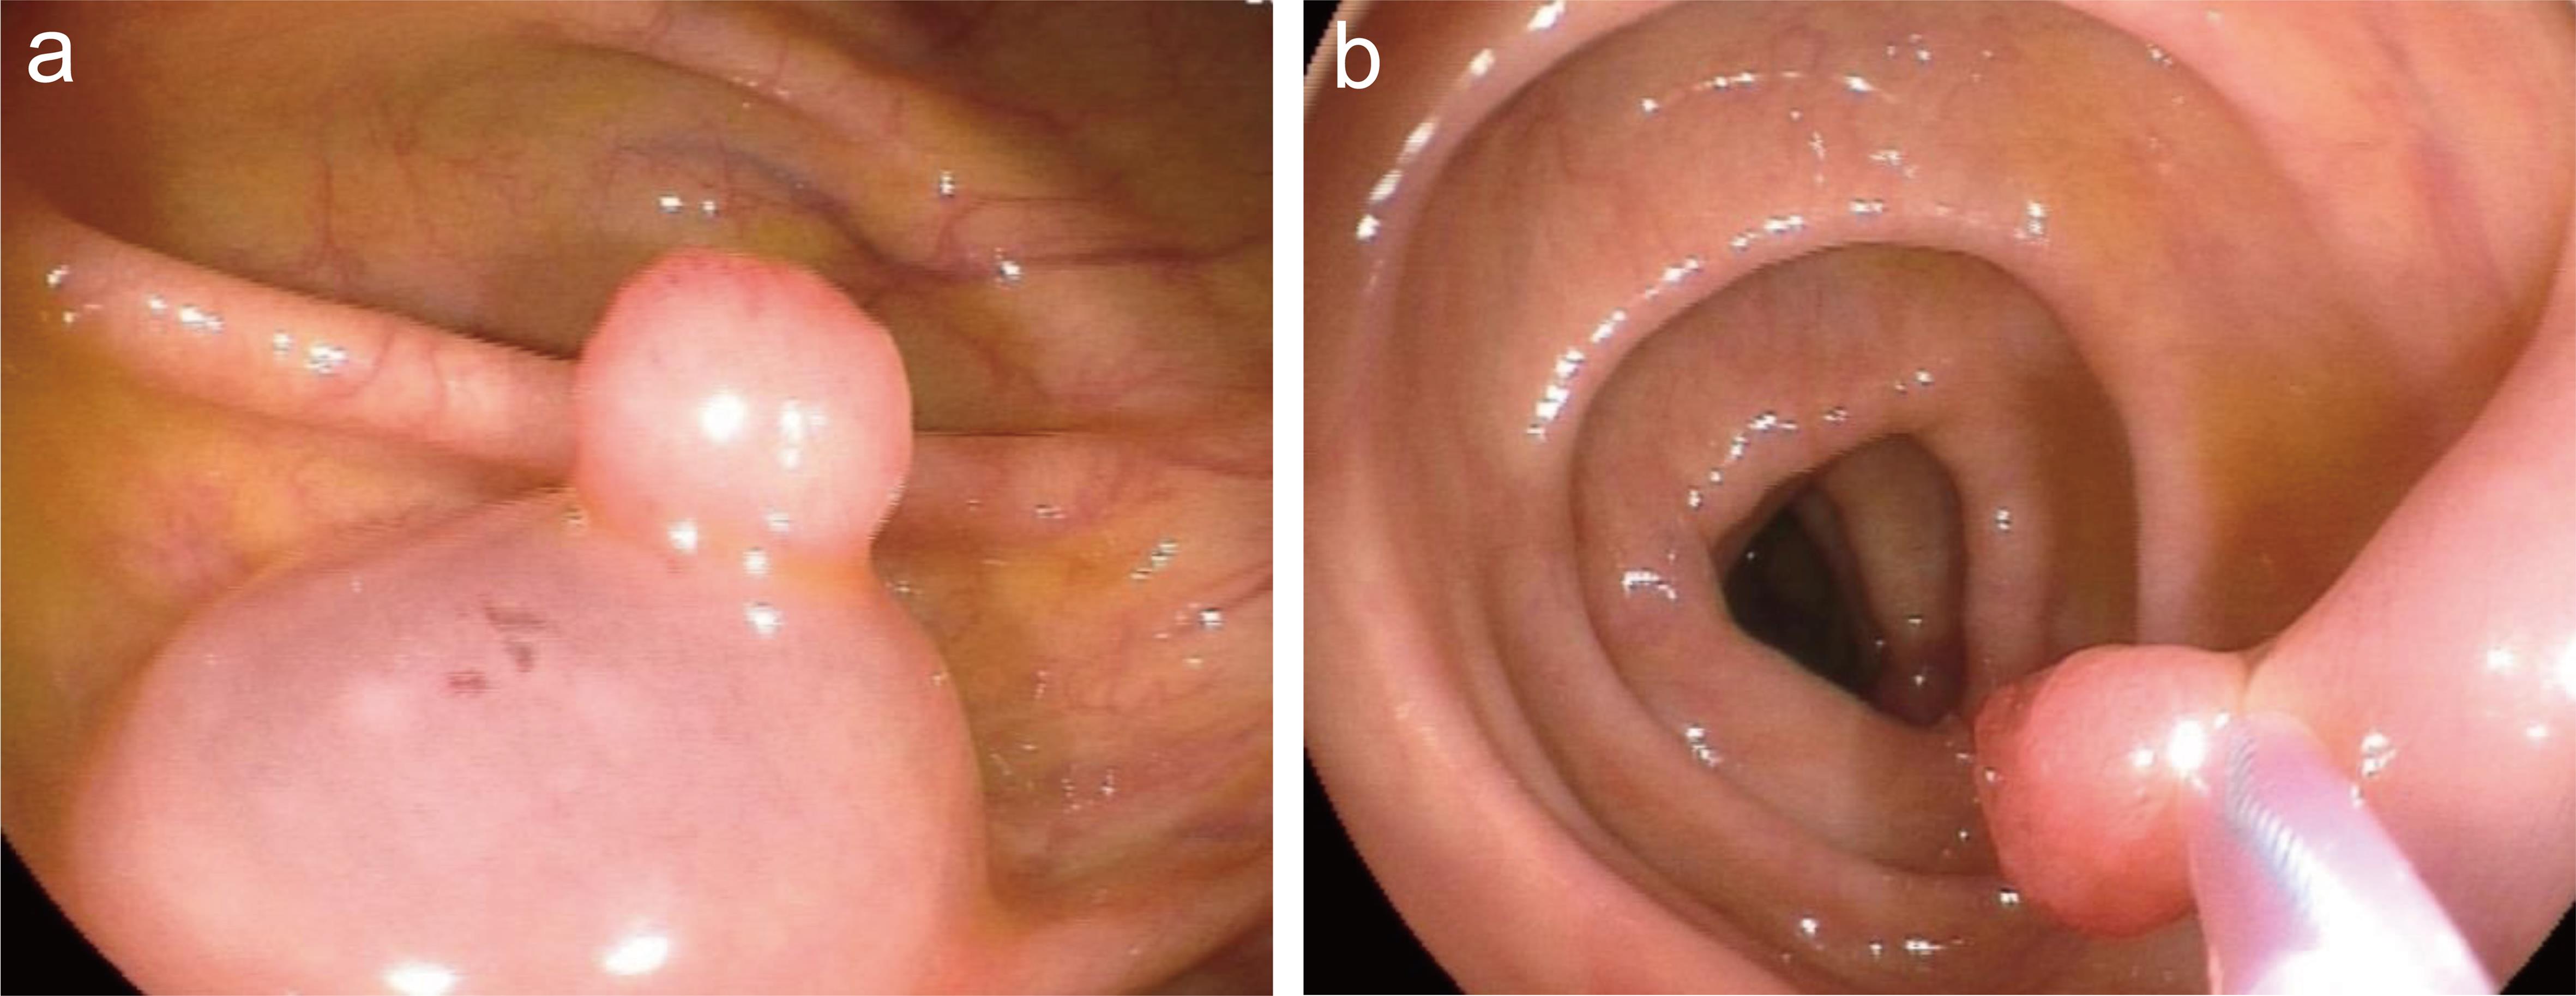 Colonoscopic removal of polyps by endoscopic mucosal resection in the ascending colon and transverse colon.